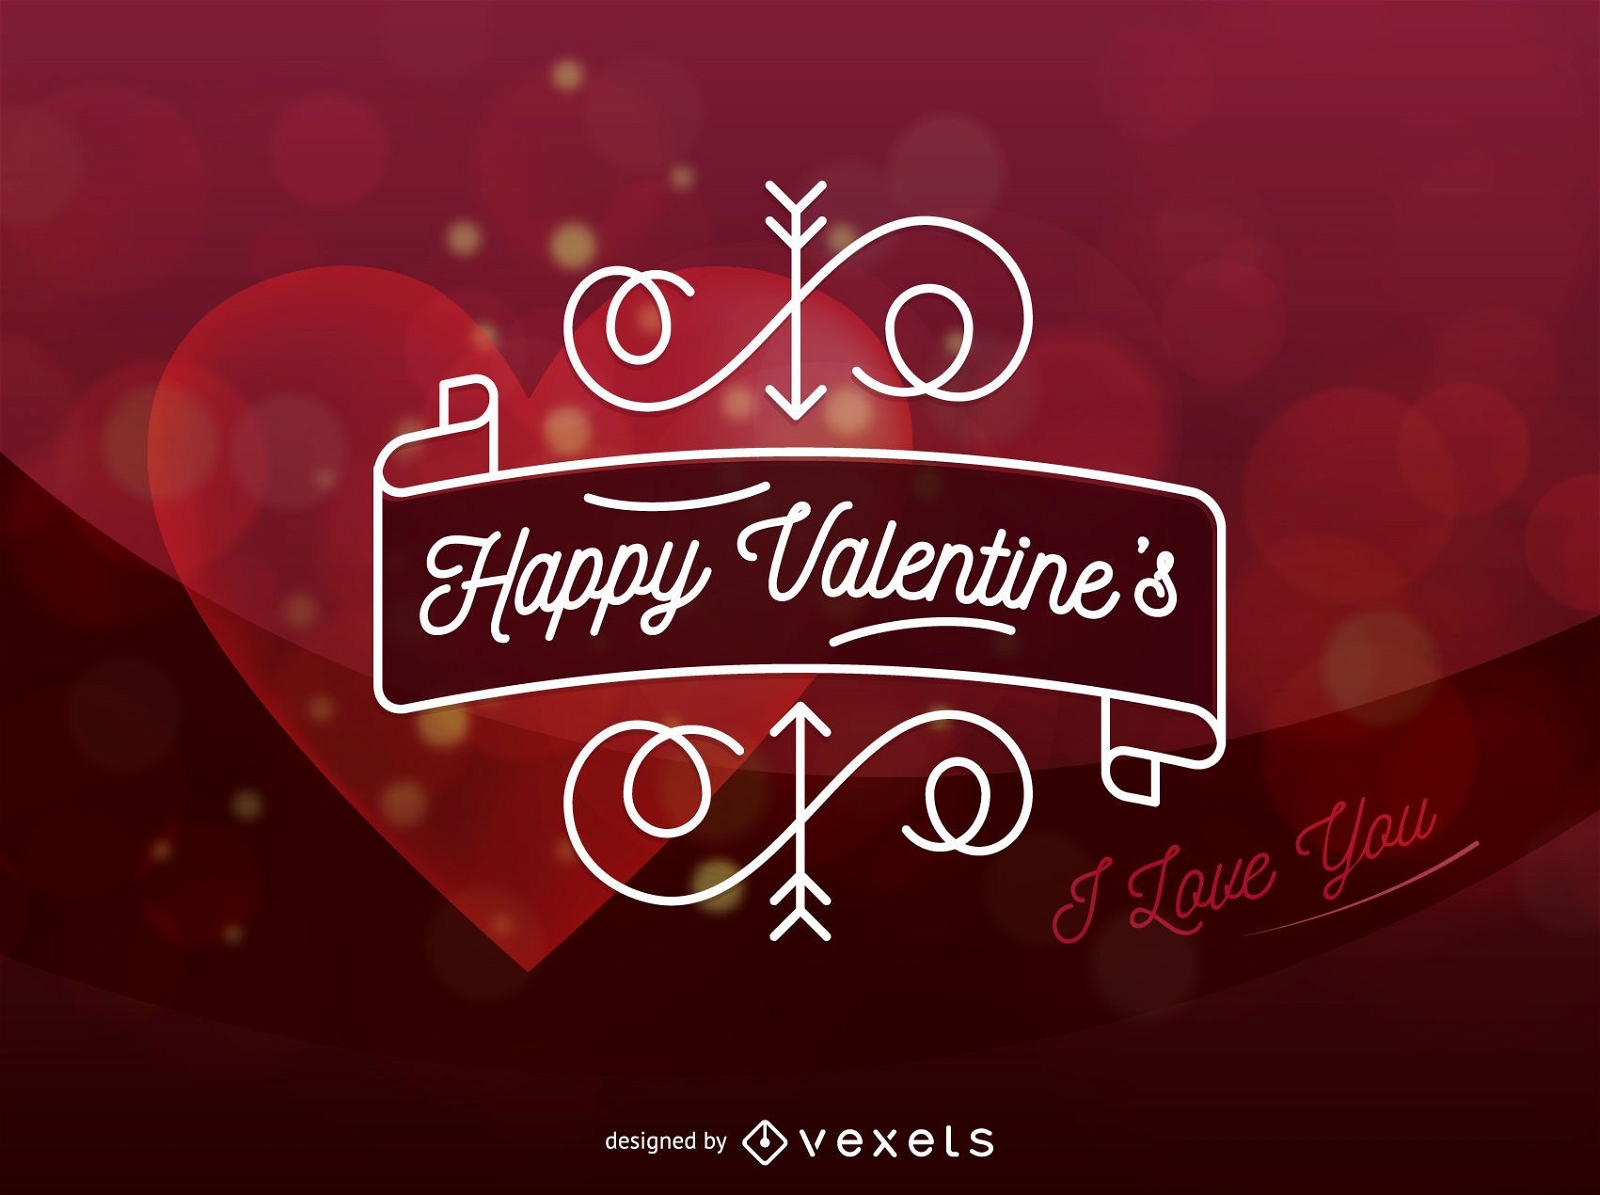 Happy Valentine's Day Heart Vector Card 